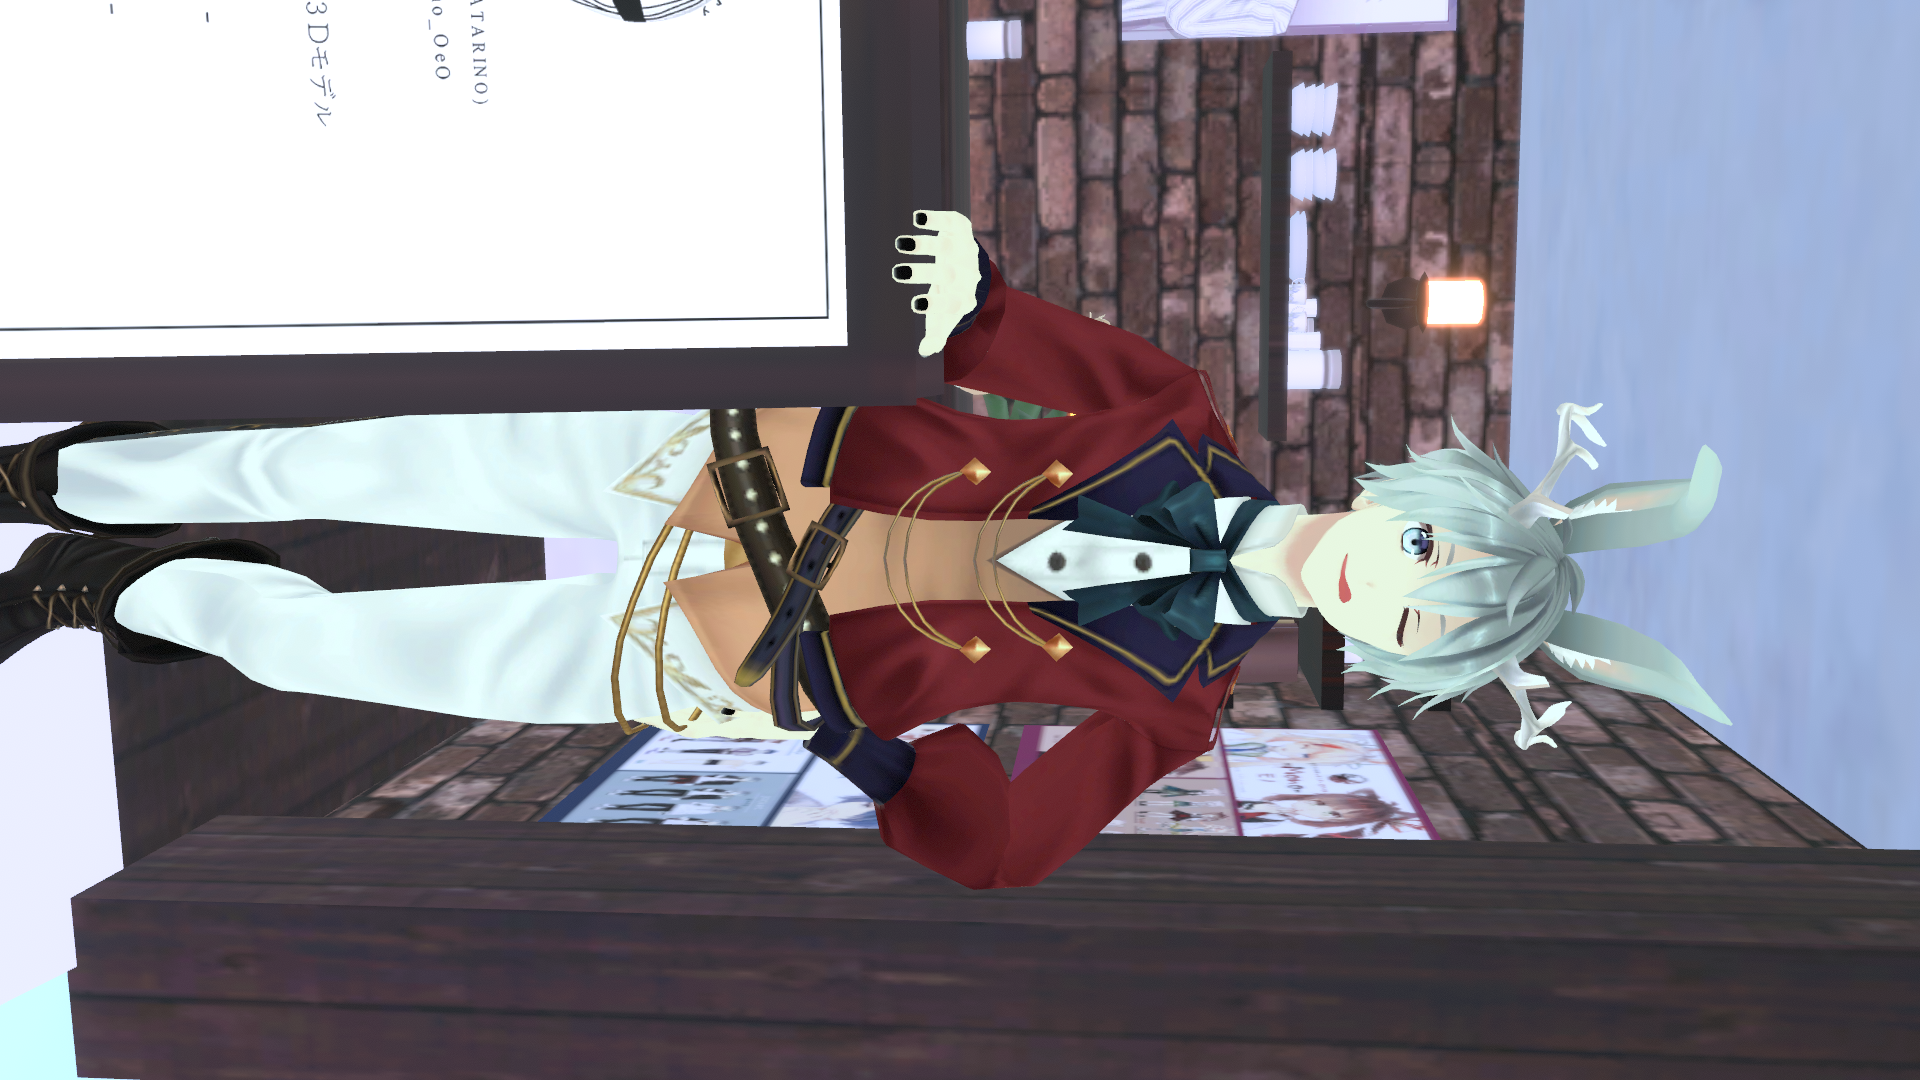 VRChat_1920x1080_2021-12-05_05-02-52.141.png